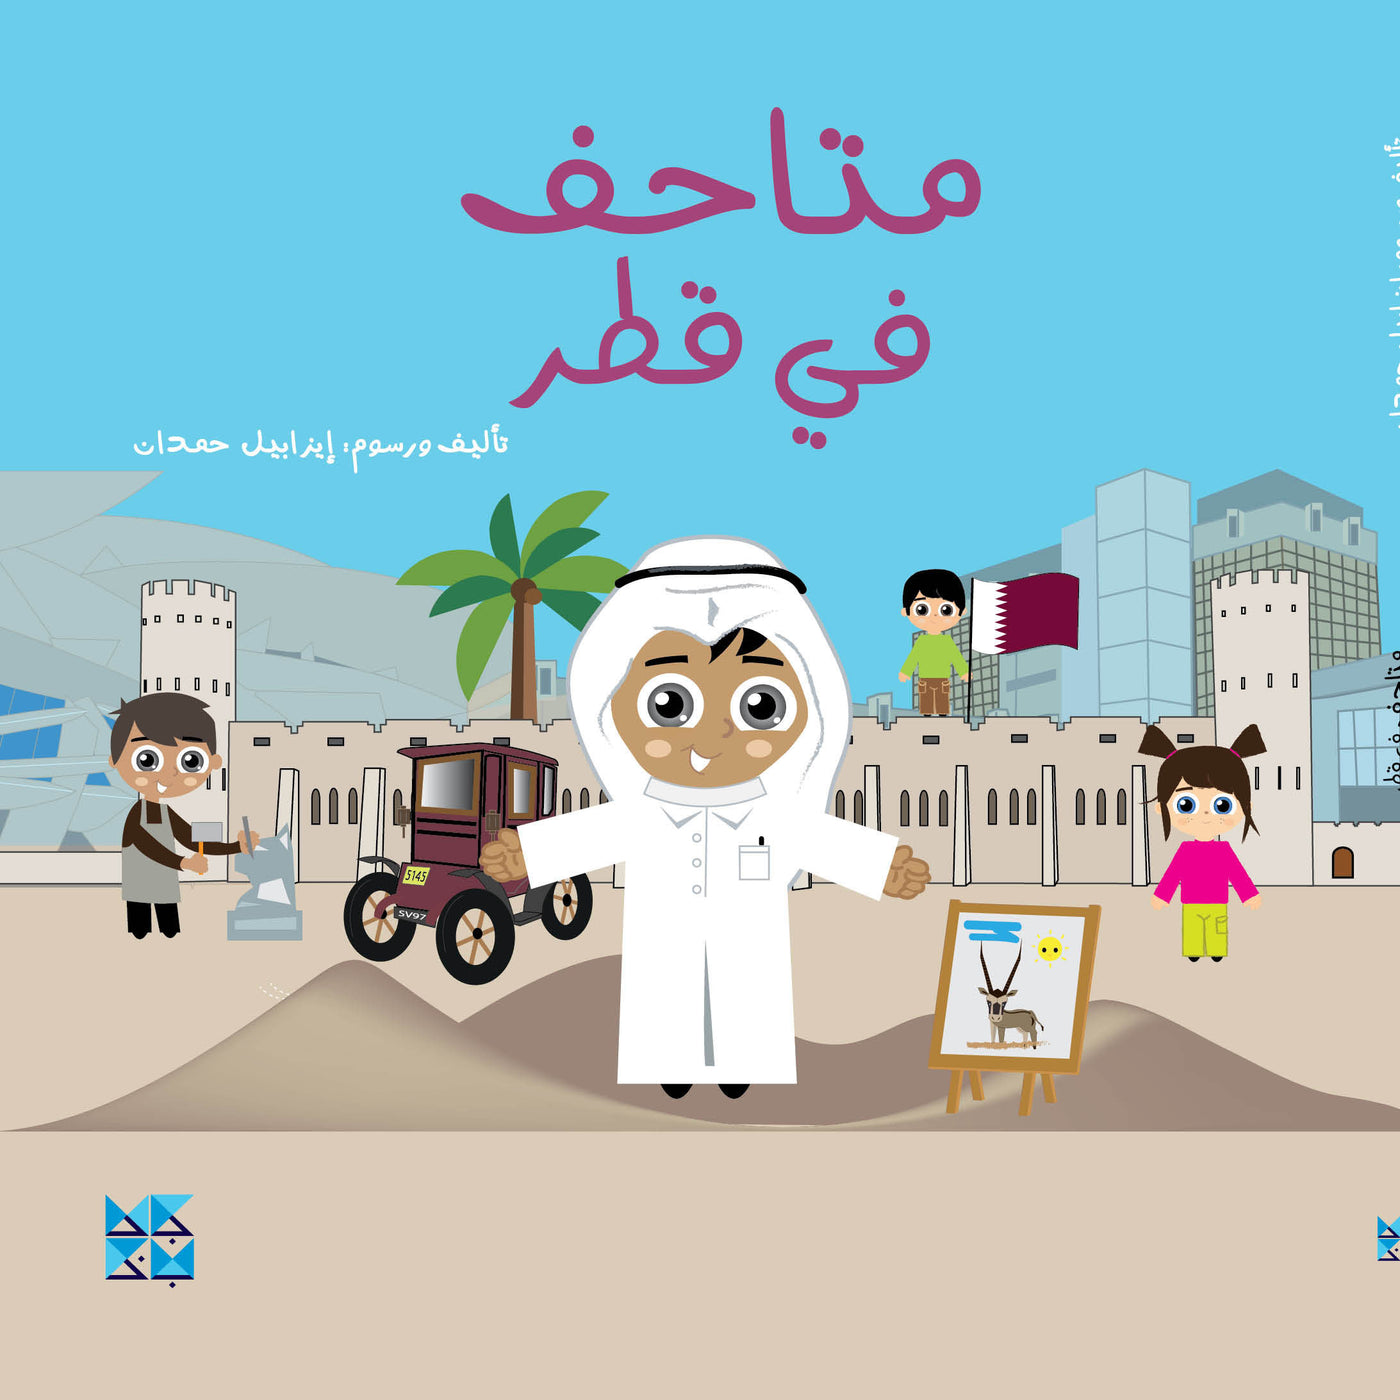 Museums of Qatar Book Cover